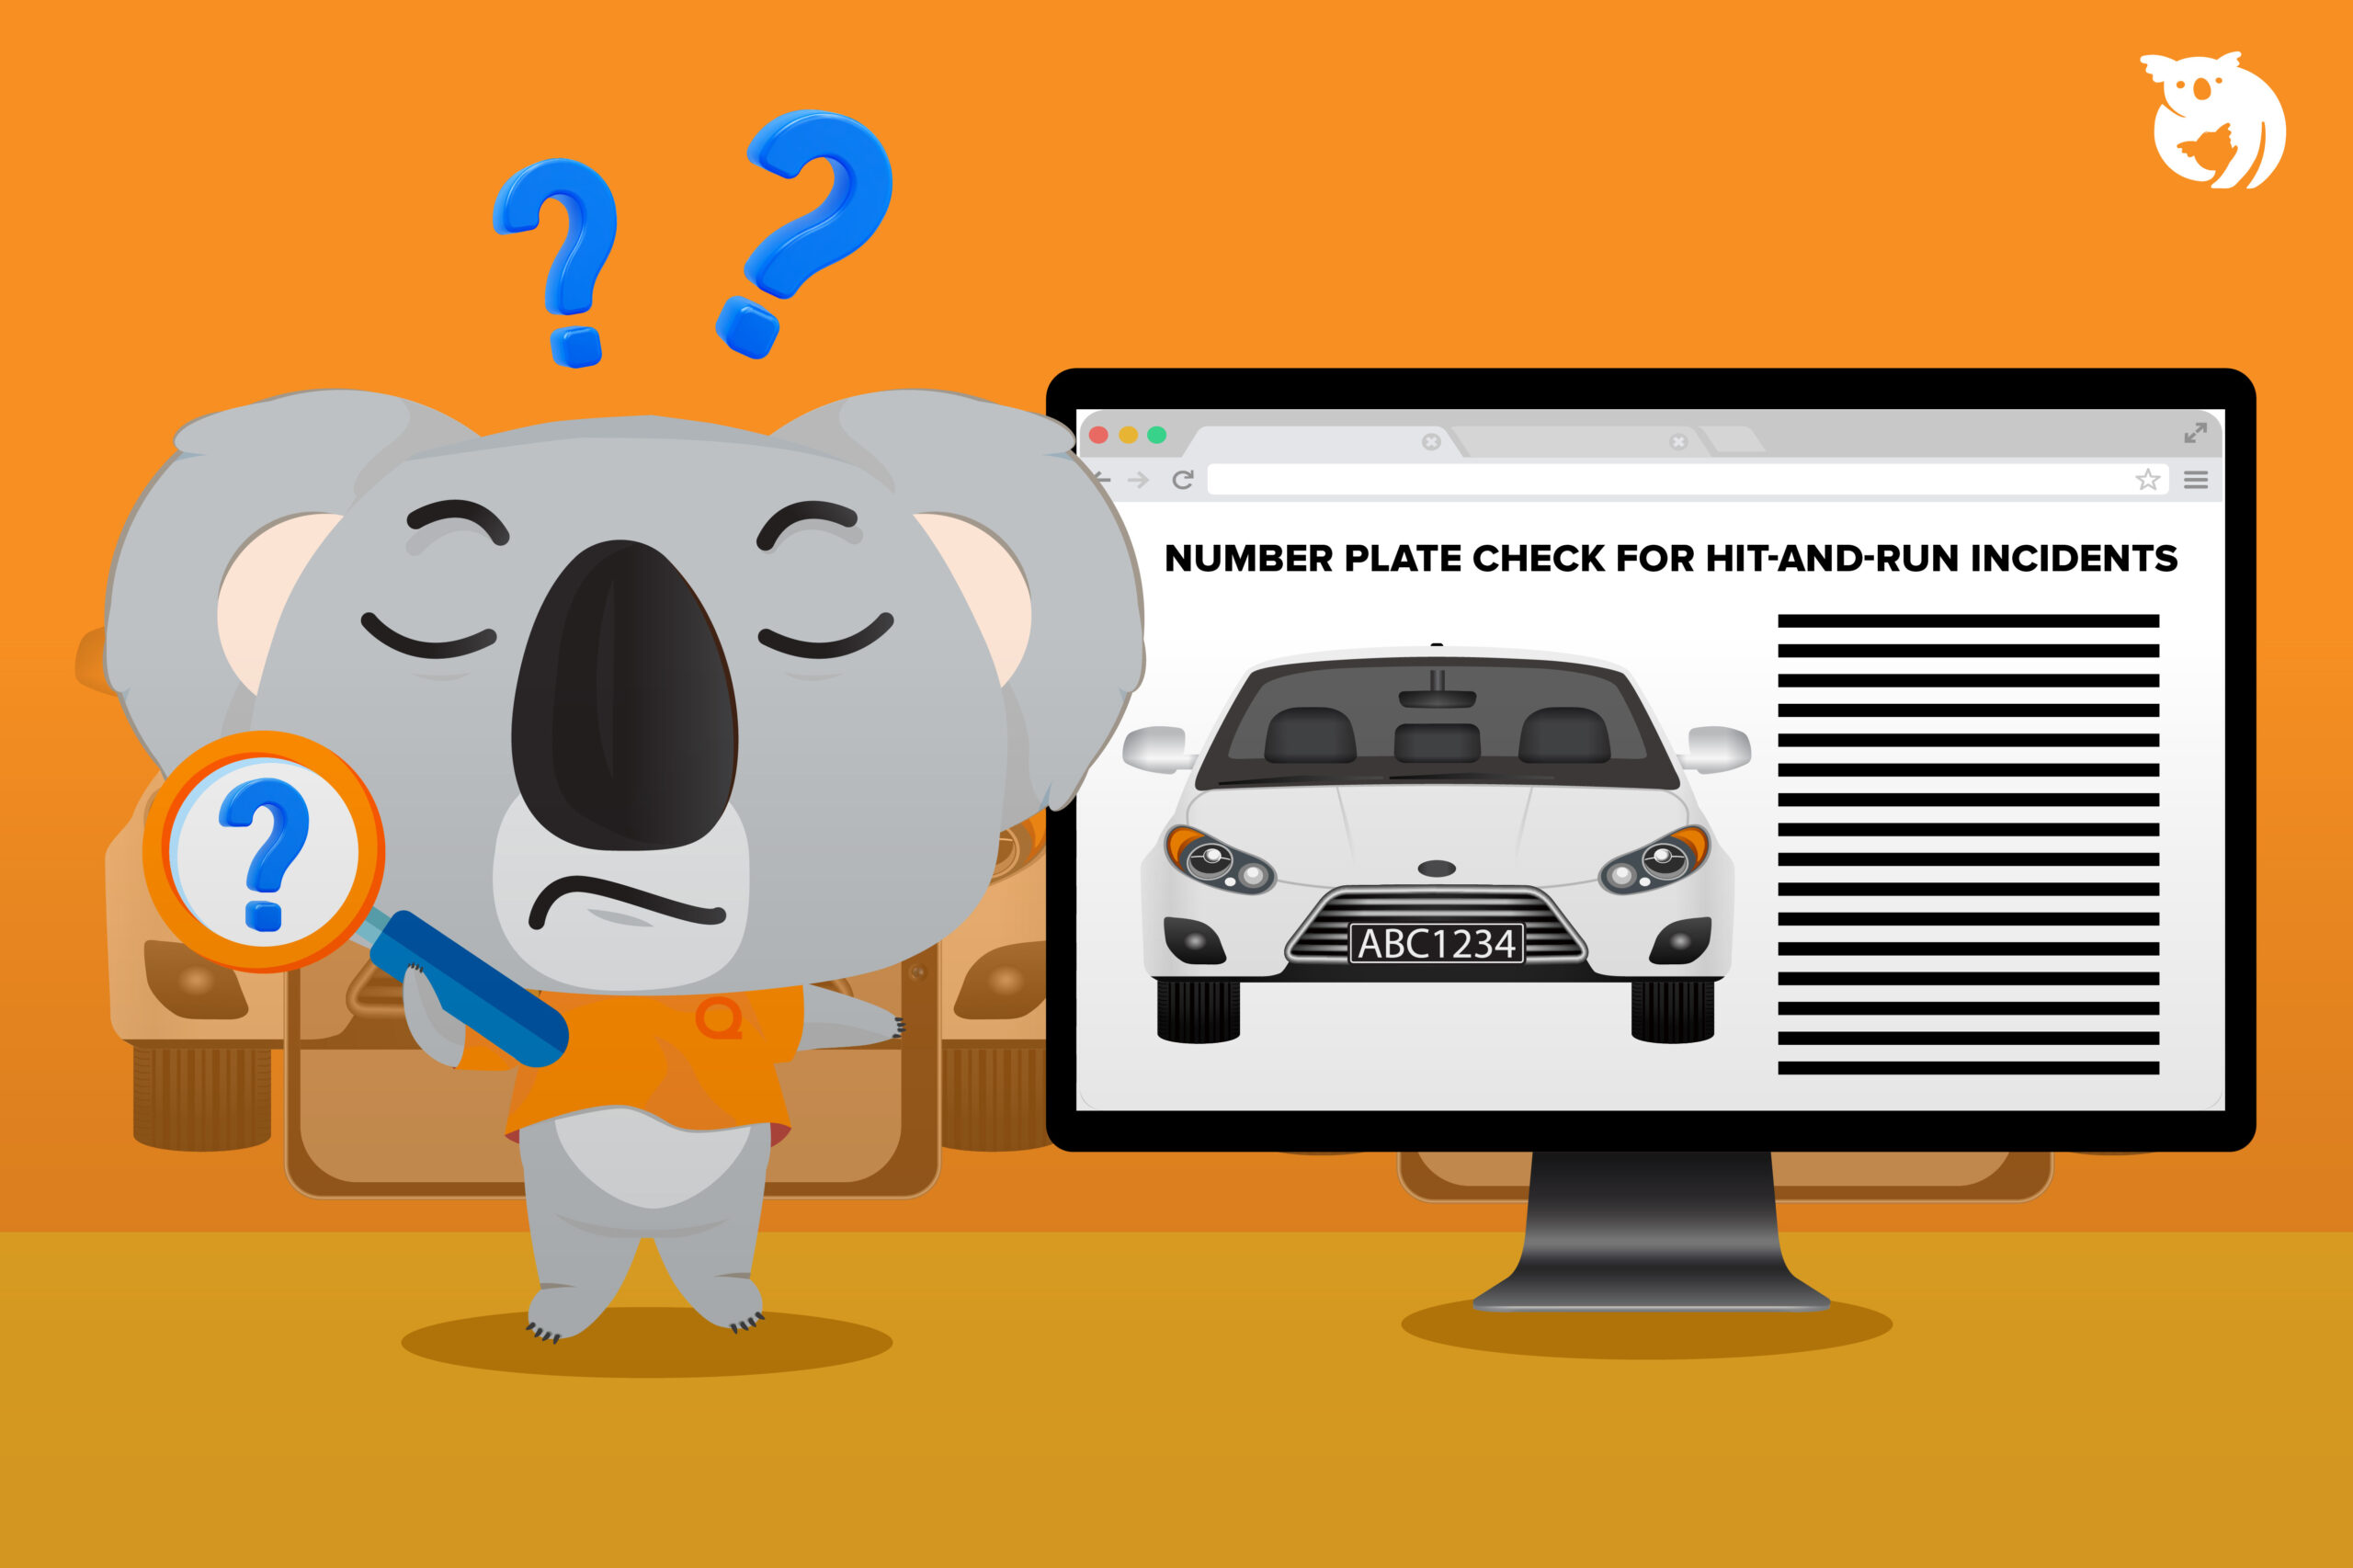 How to Perform a Car Number Plate Check for Hit-and-Run Incidents: Follow These 7 Steps